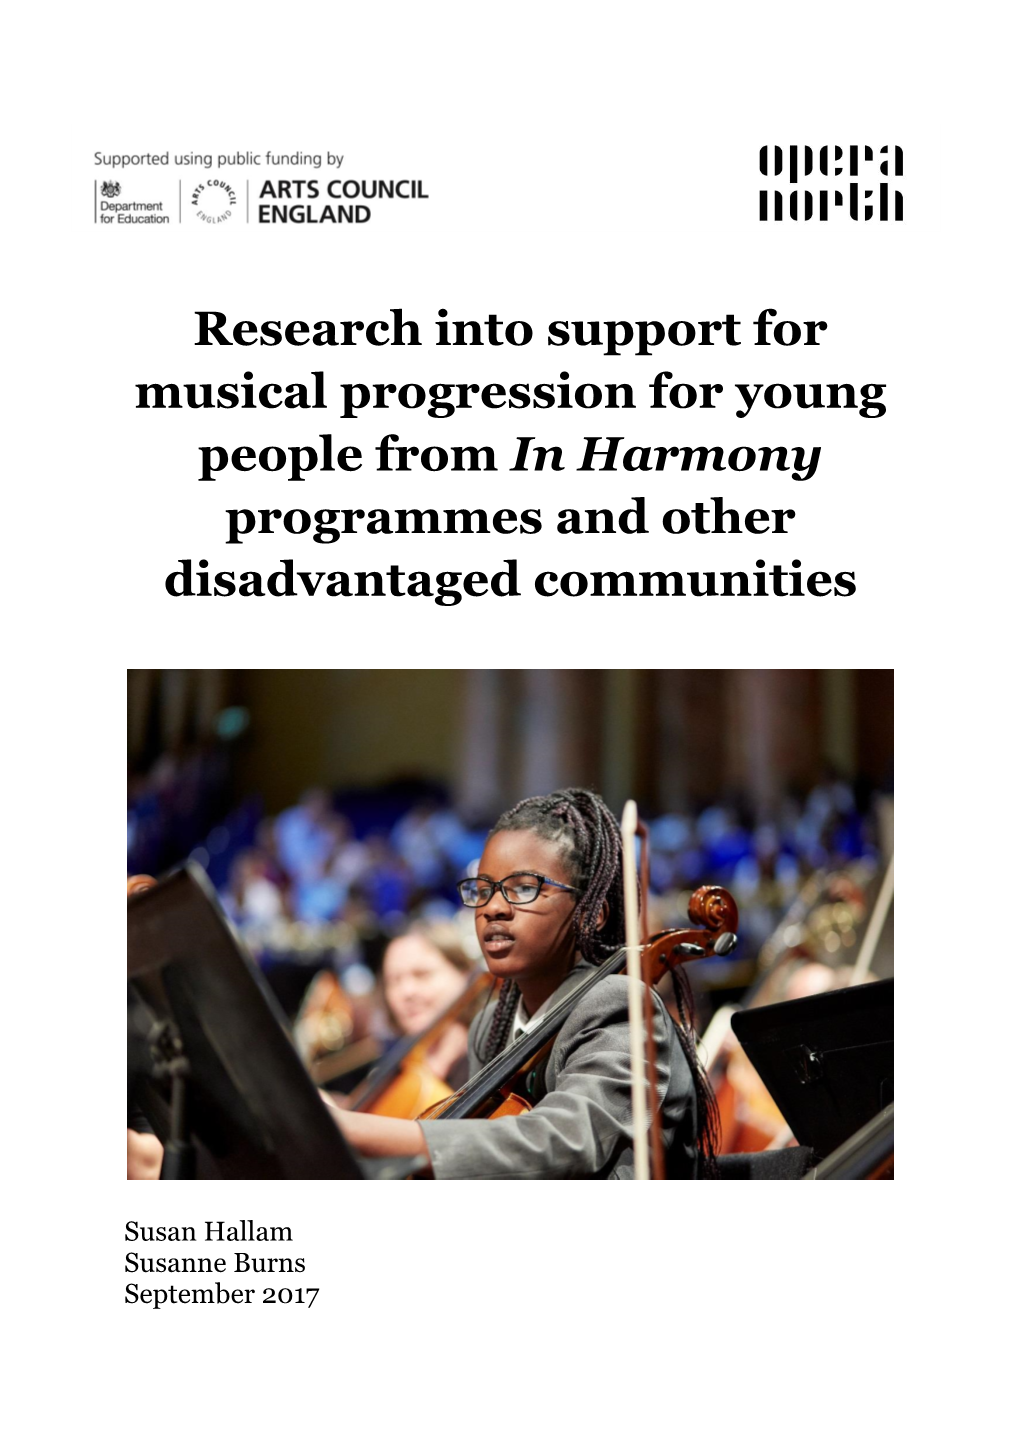 Research Into Support for Musical Progression for Young People from in Harmony Programmes and Other Disadvantaged Communities